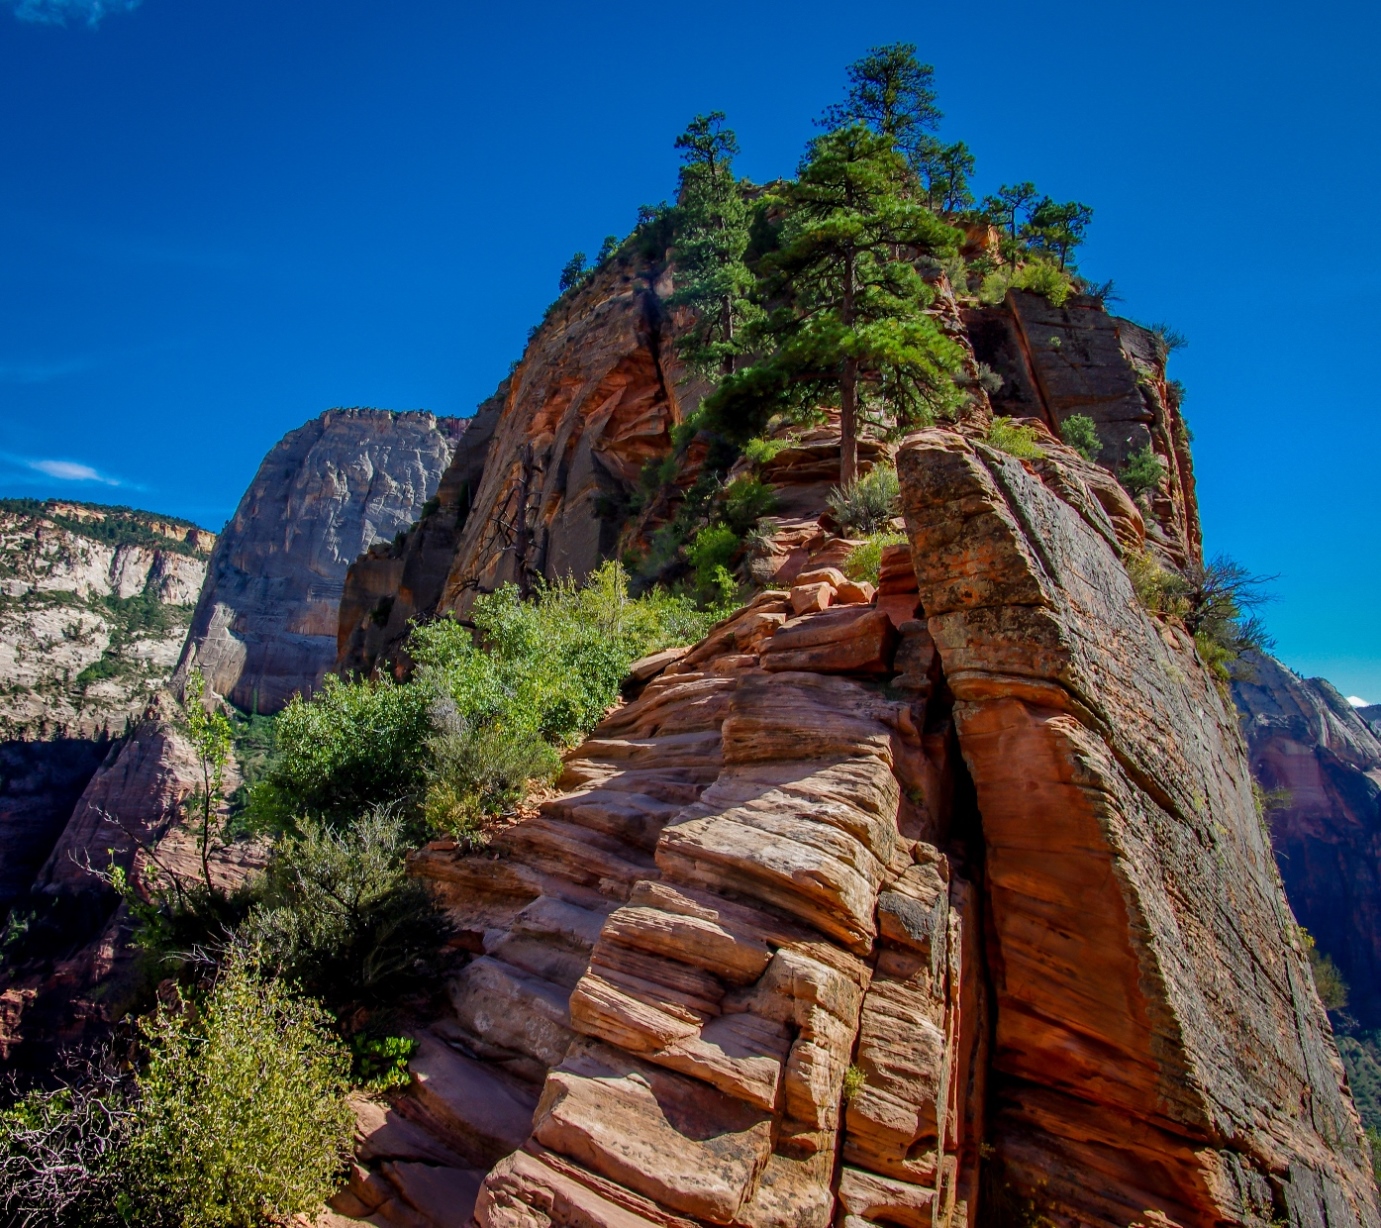 Steep And Chalenging Trail To Angels Landing In Zion National Park, UT